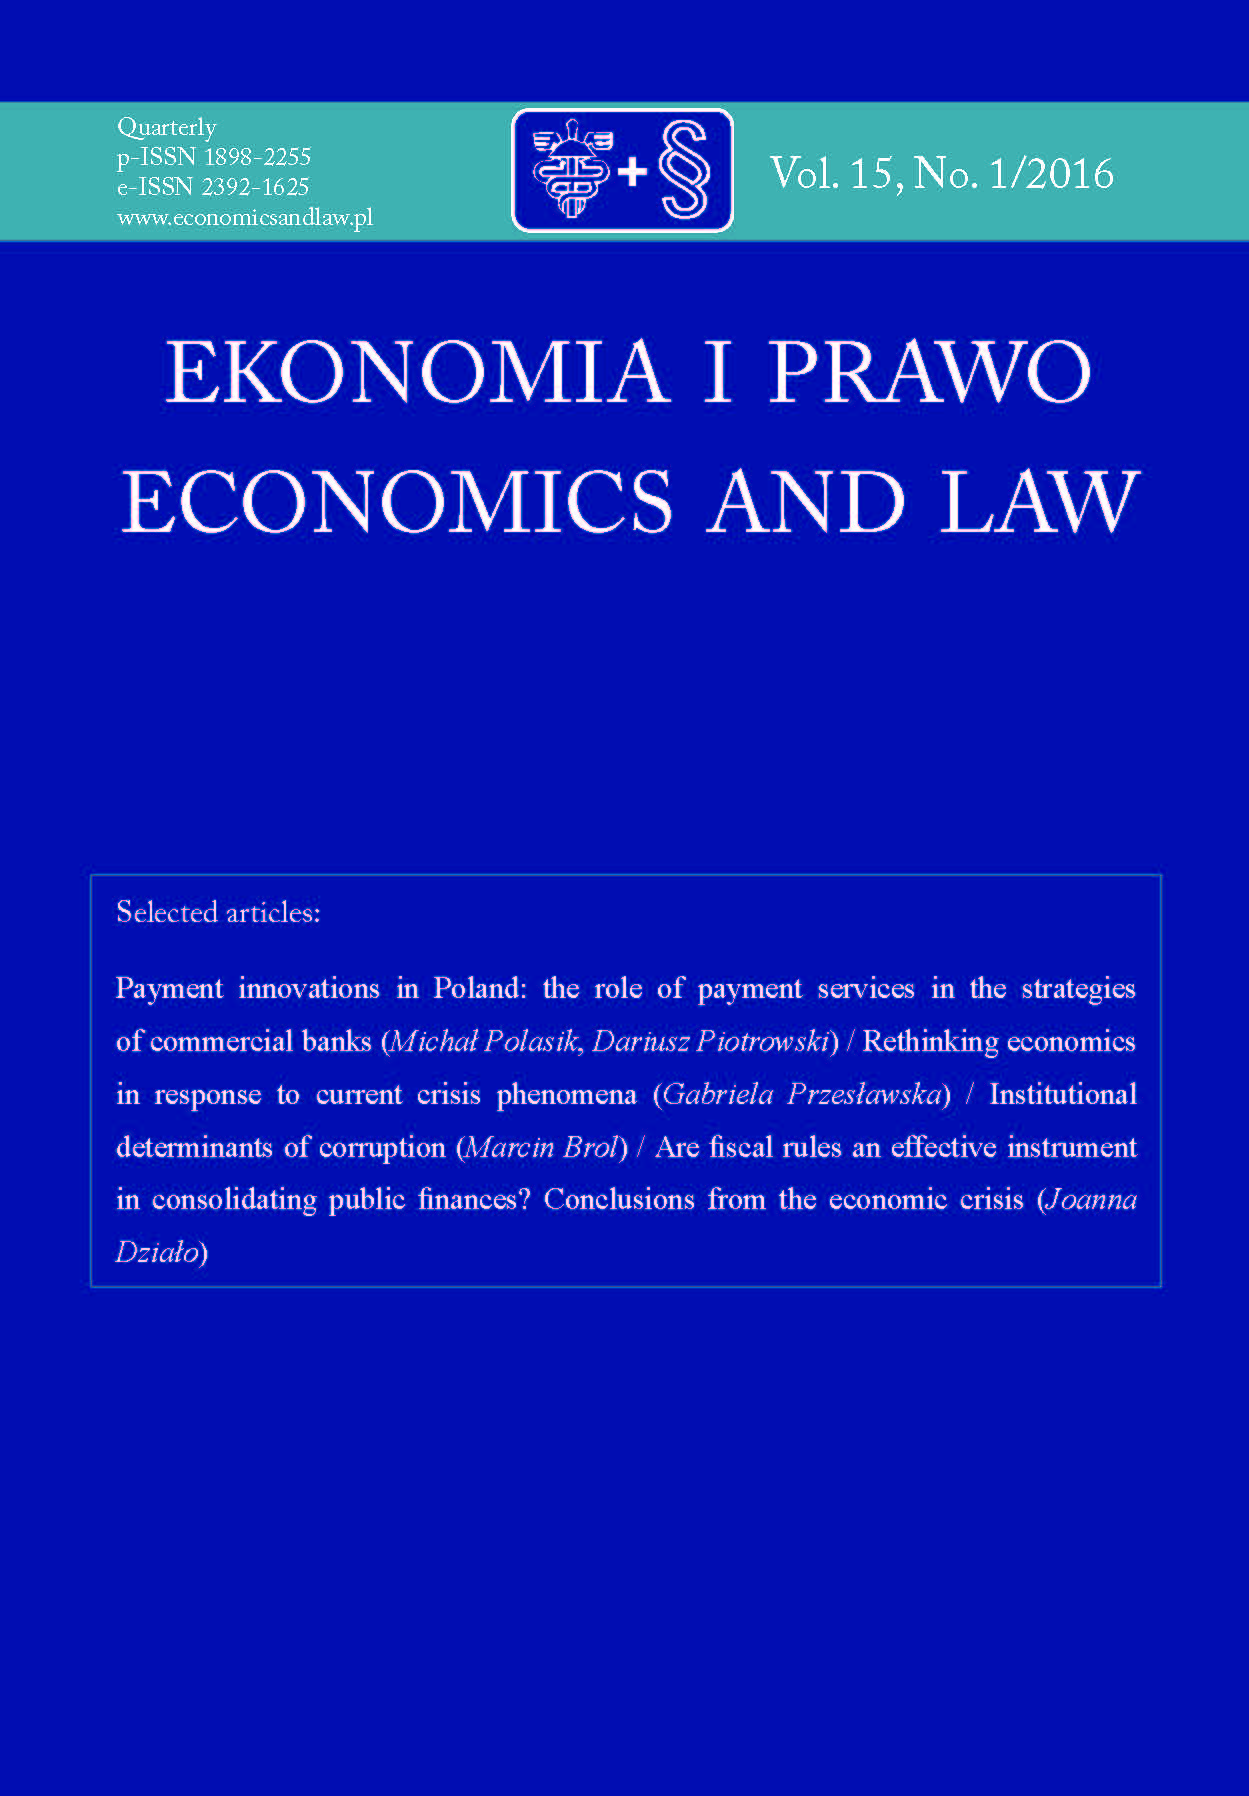 THE ISSUE OF ECONOMIC CRISES AND CYCLICAL FLUCTUATIONS IN POLISH ECONOMIC THOUGHT IN THE INTERWAR PERIOD Cover Image